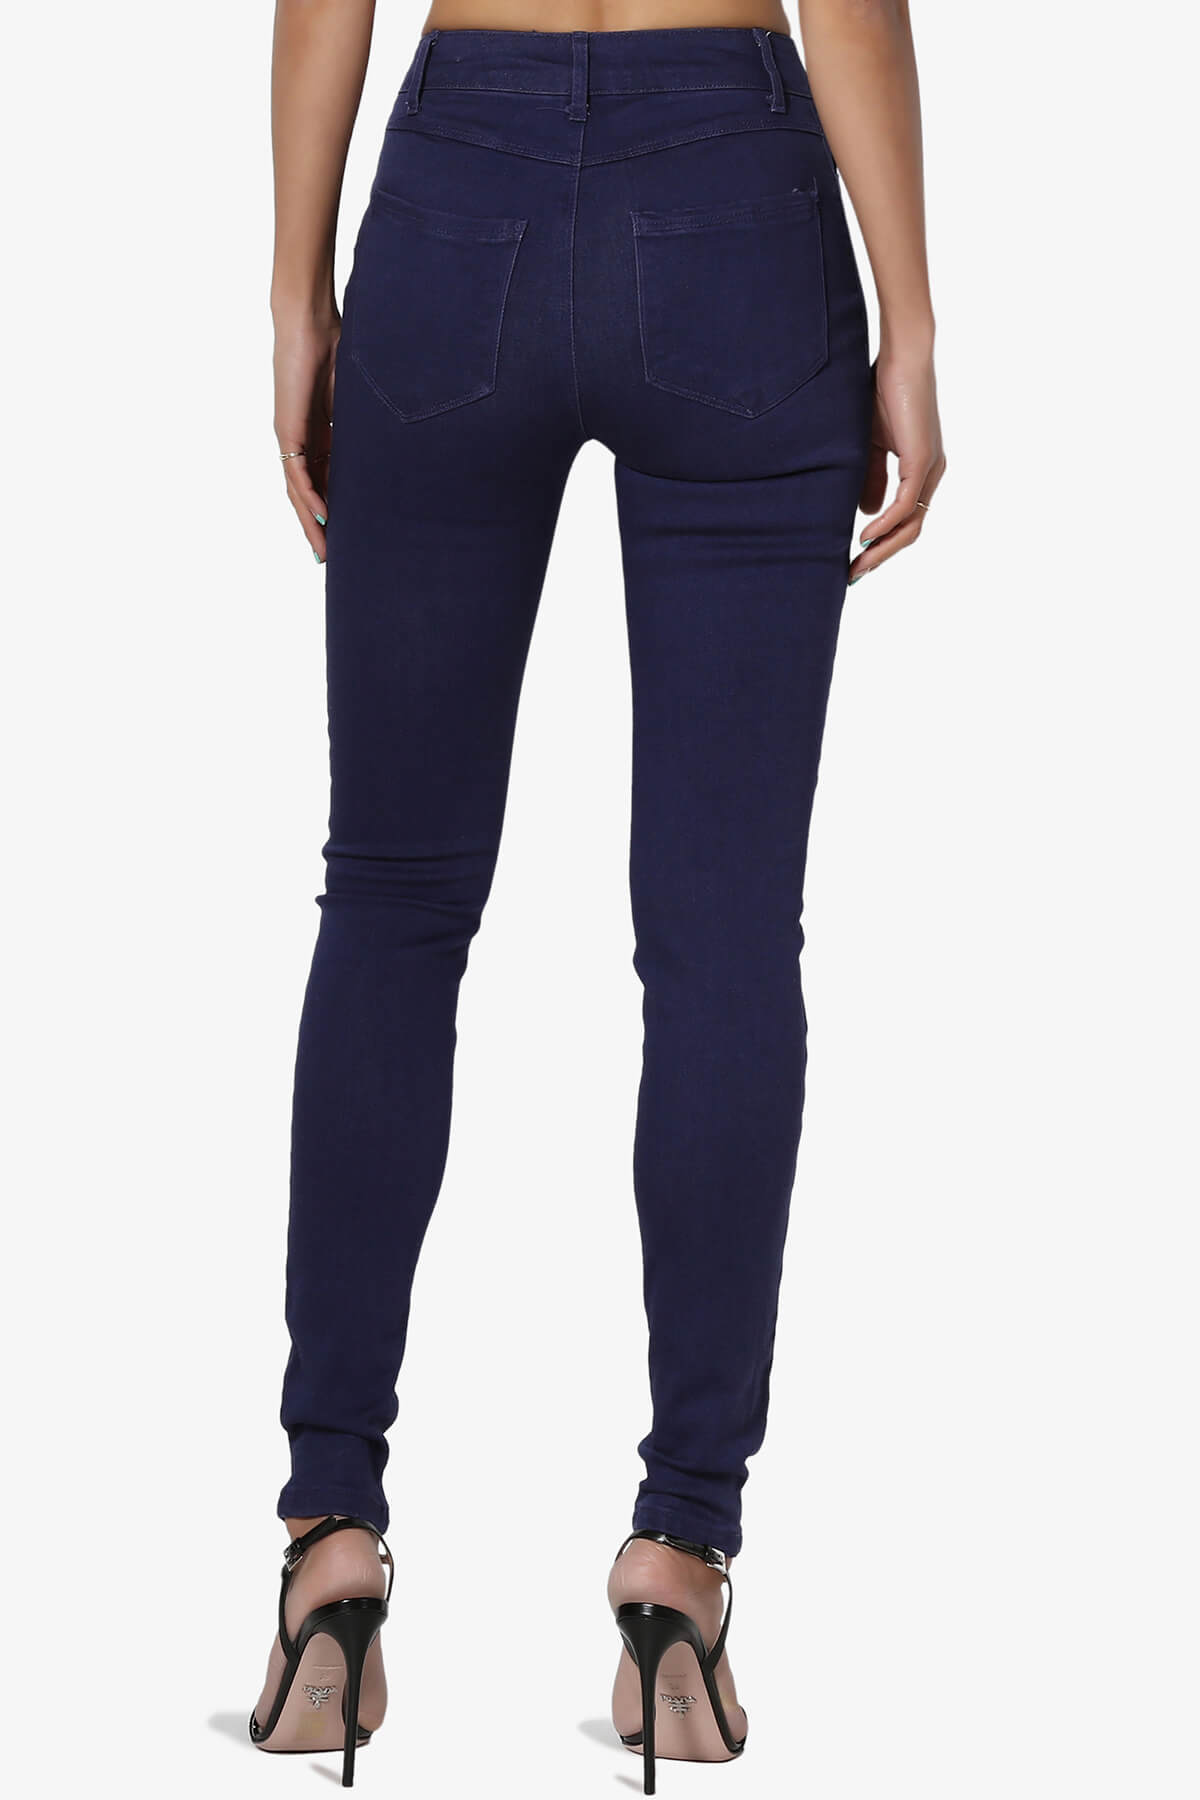 Load image into Gallery viewer, Doris High Rise Skinny Jeans NAVY_2
